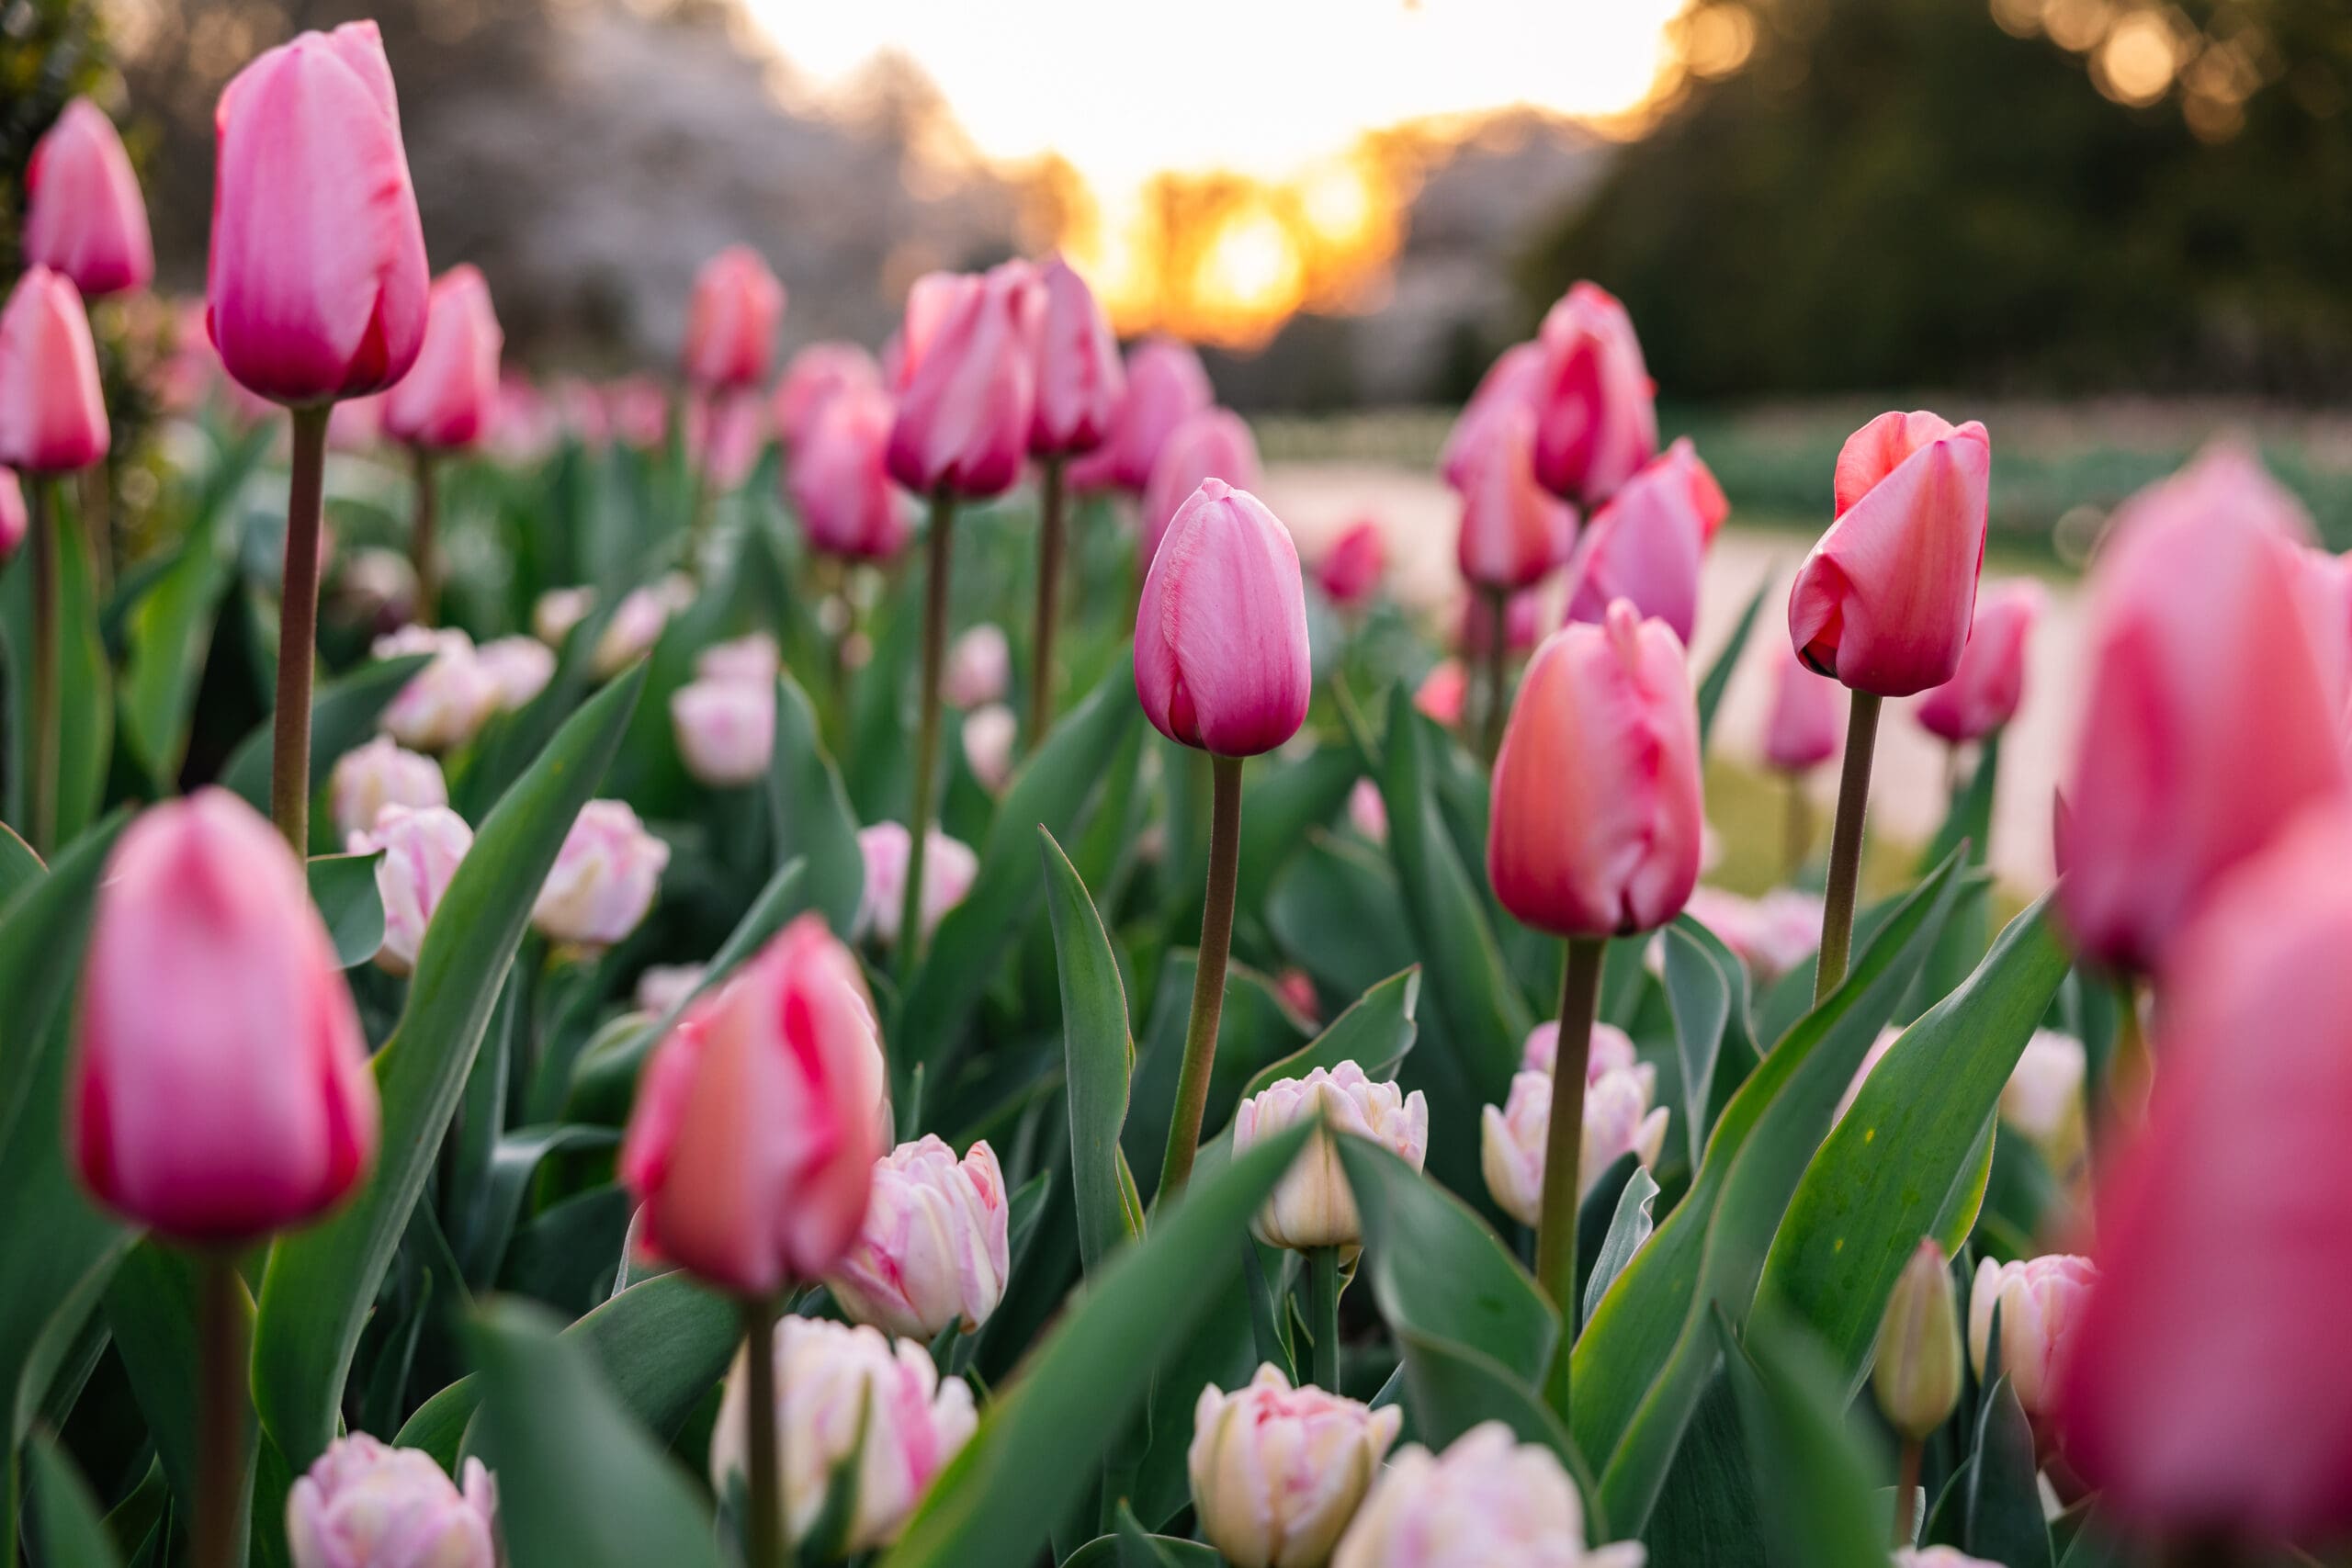 Featured image for “Longwood’s tulips will hit peak bloom now through next week”